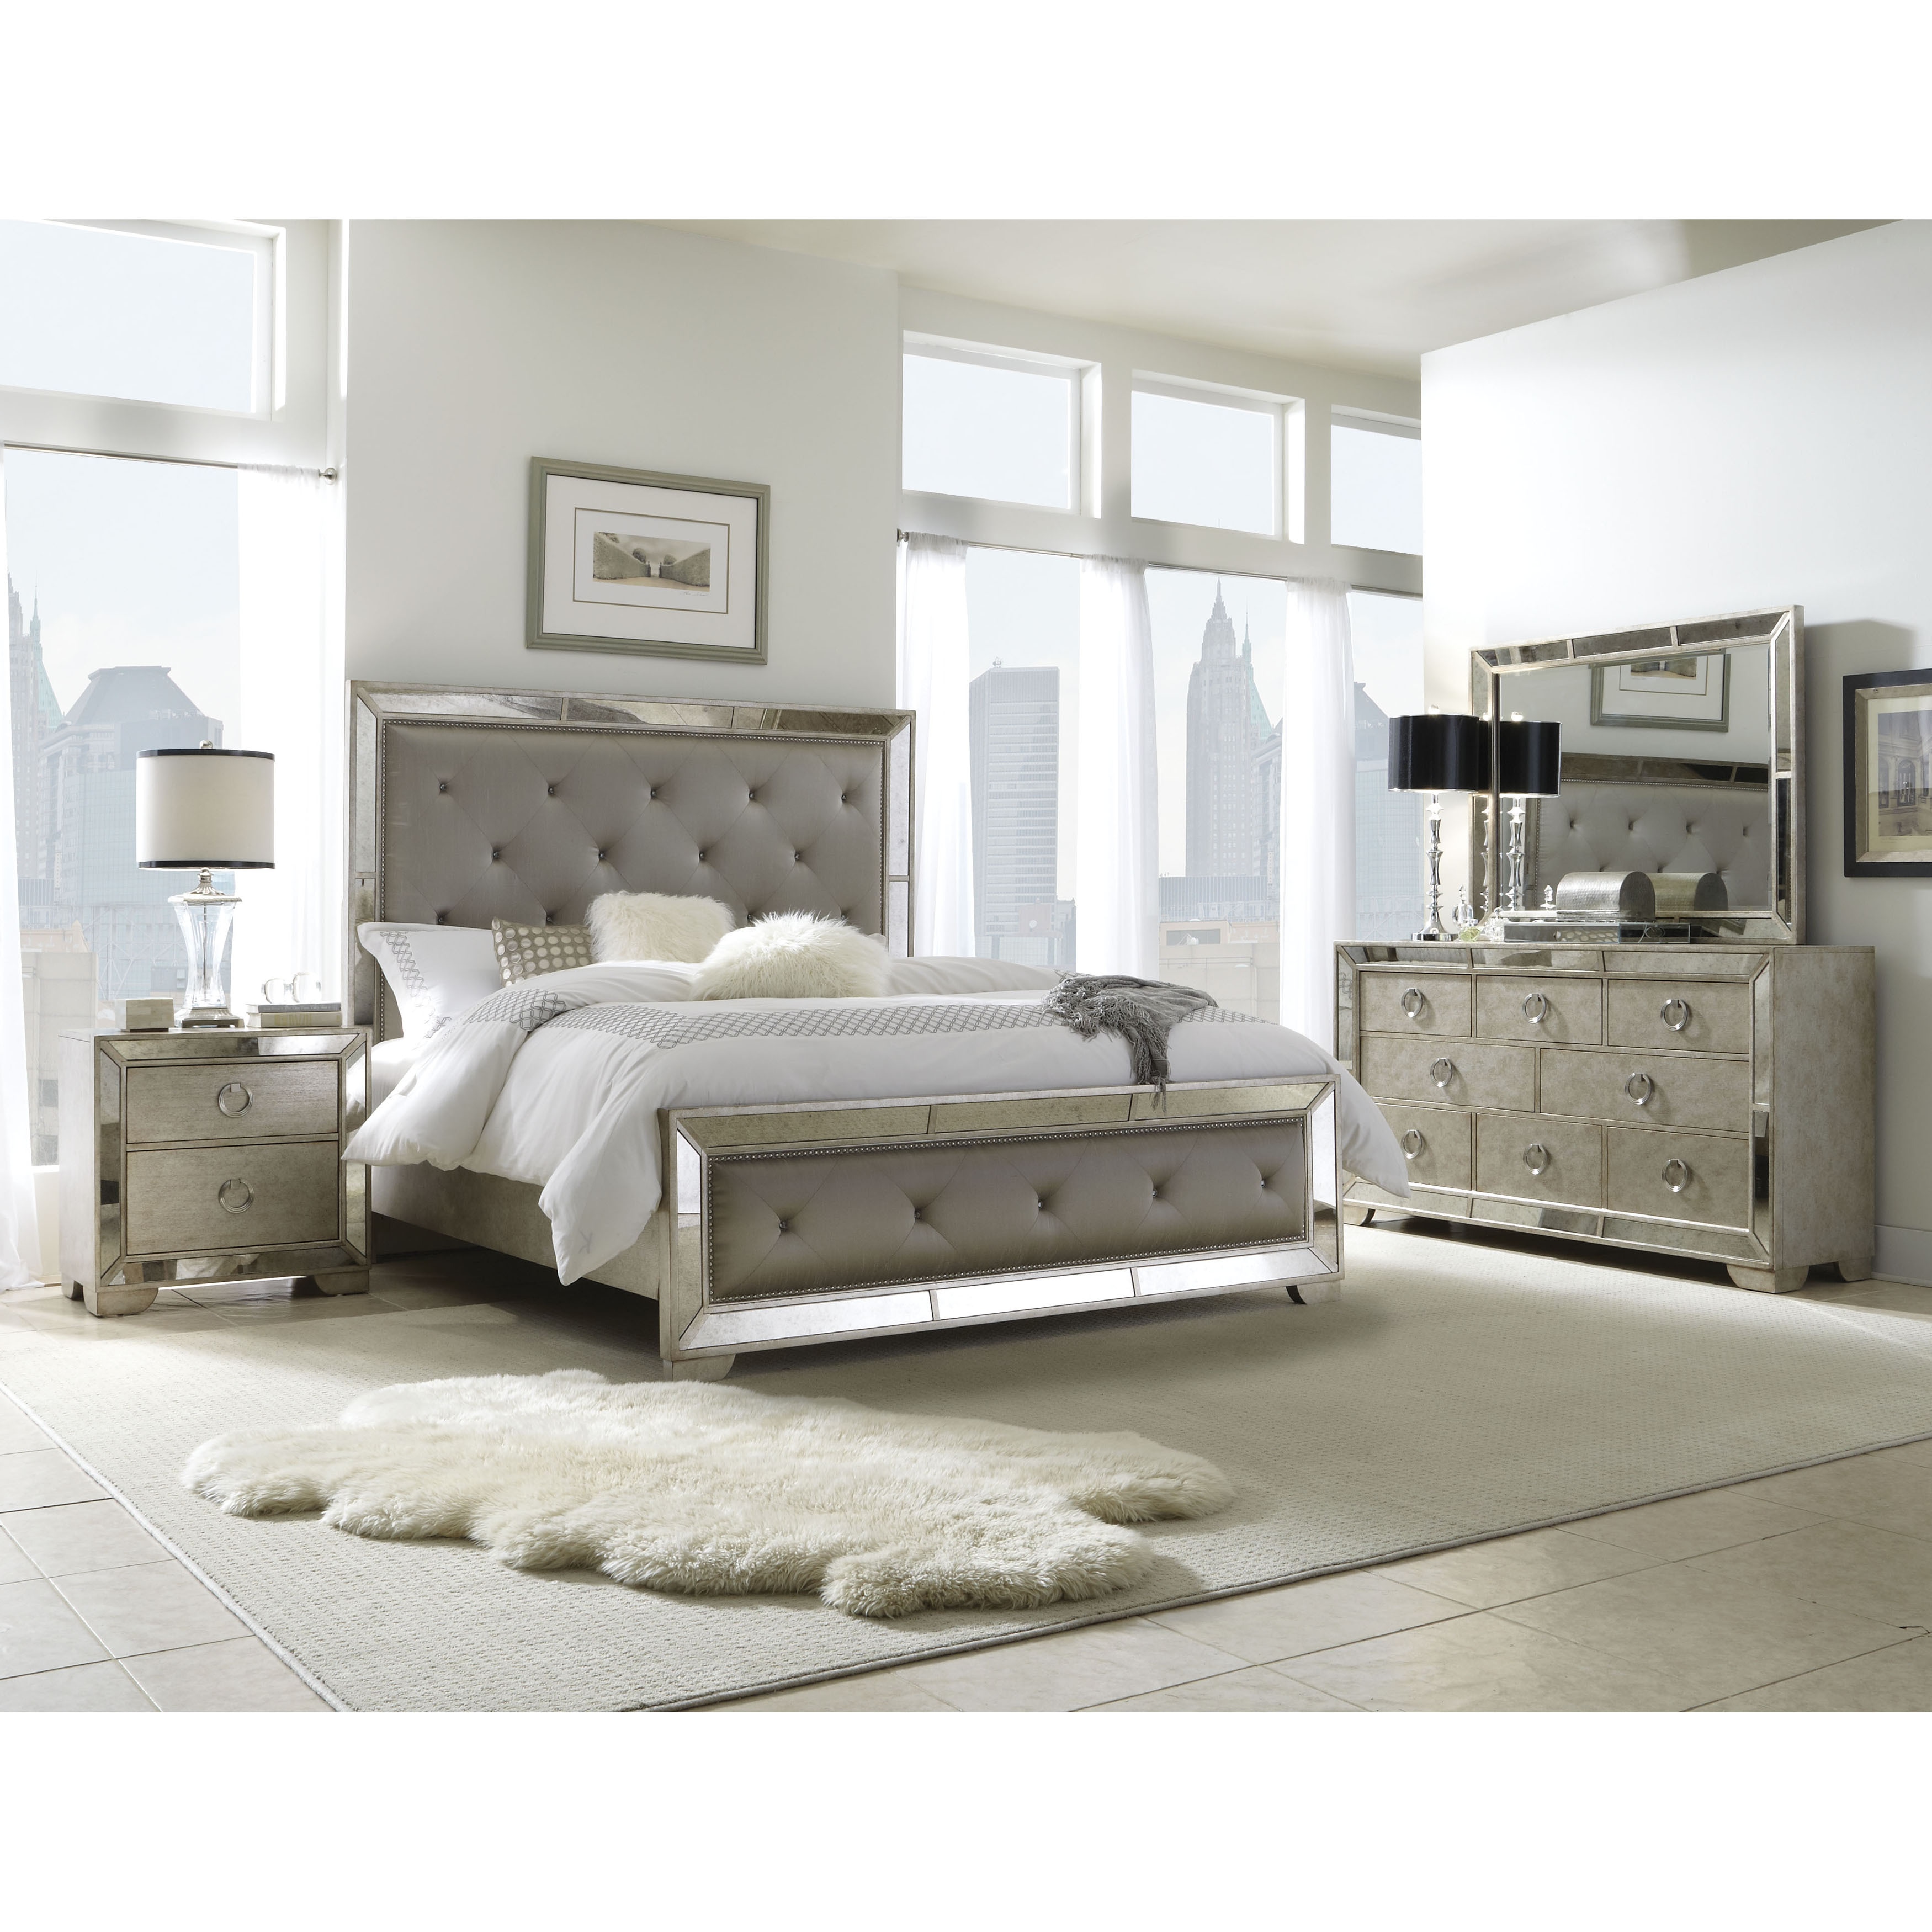 Celine 6 Piece Mirrored And Upholstered Tufted Queen Size Bedroom Set Overstock 8409730